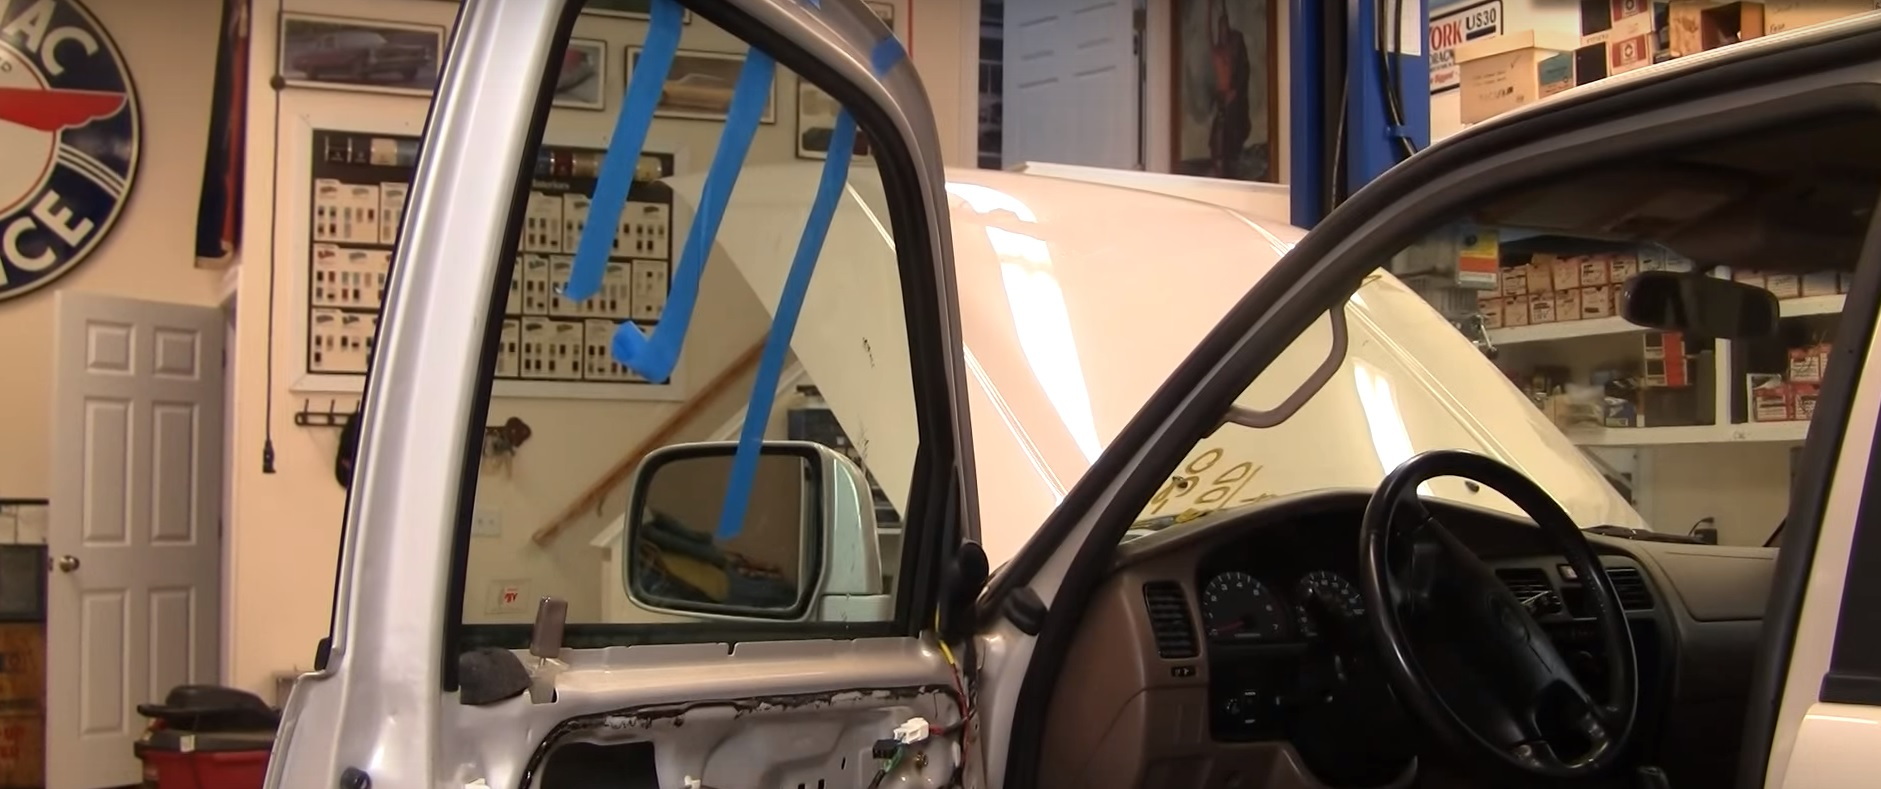 Pull the window all the way up and secure it using painter's tape